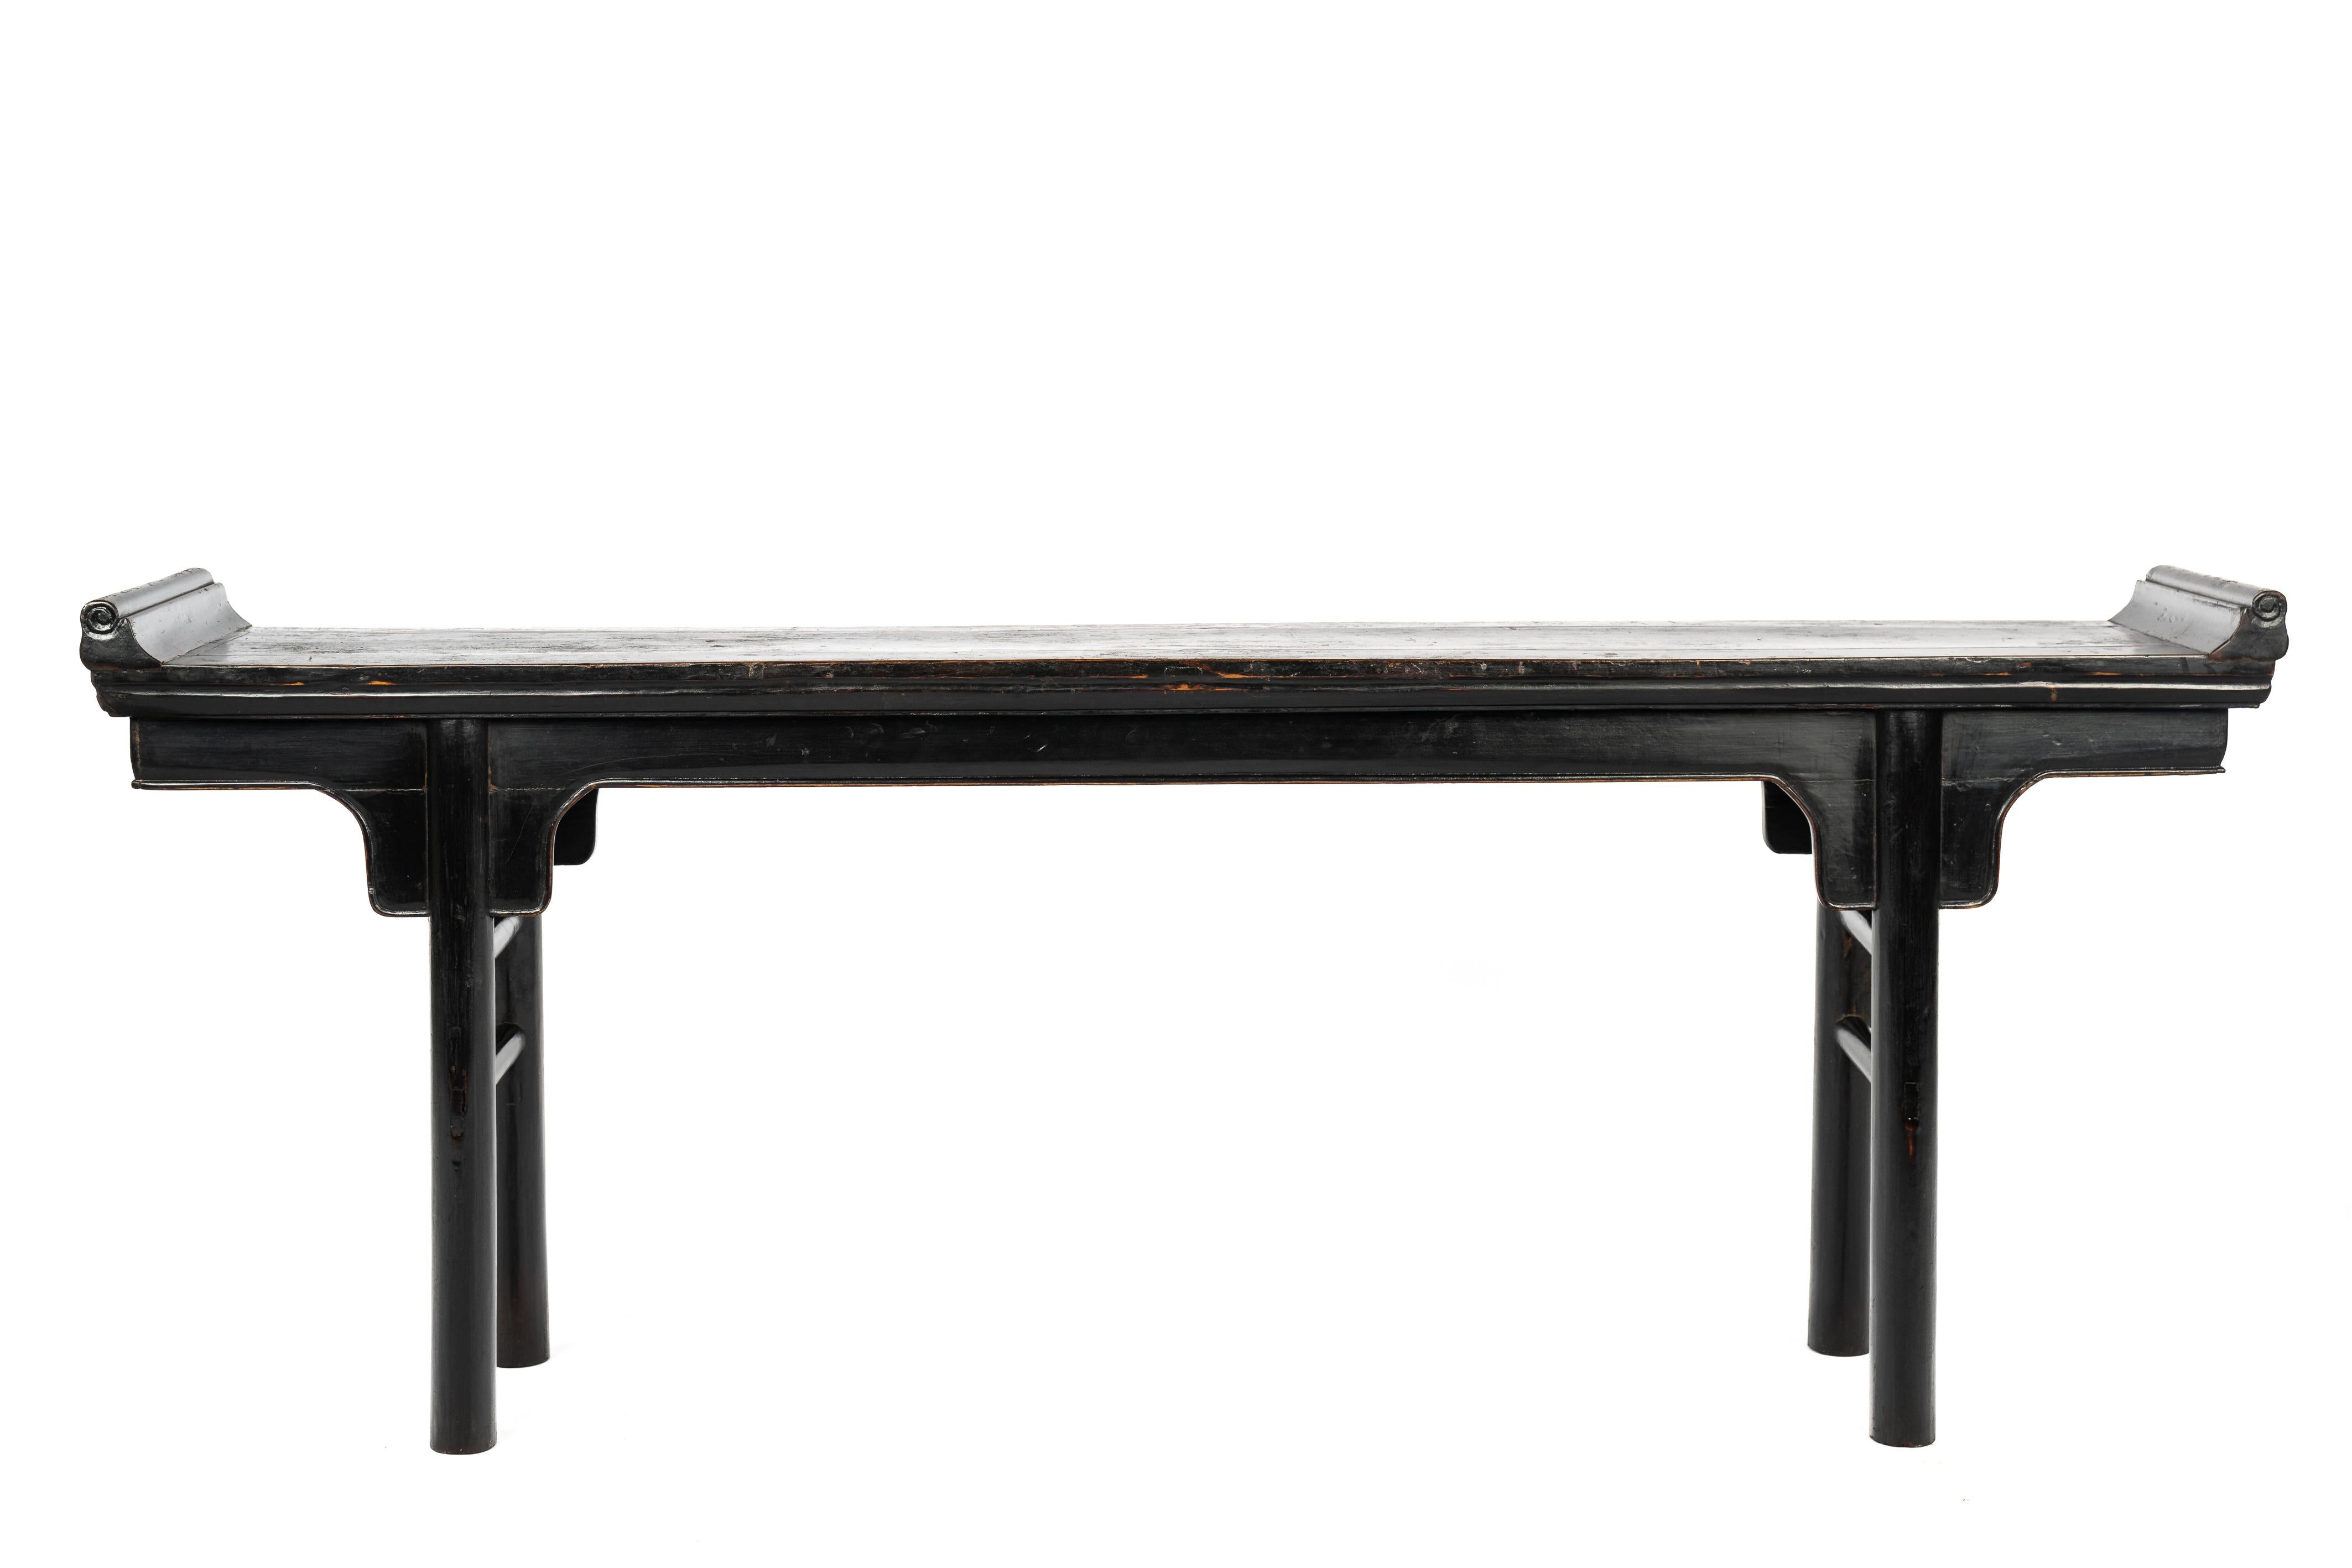 On offer here is a beautiful antique blackened Chinese Altar table, crafted in the early 1900s around 1920. This stunning piece, made from elm wood, embodies the perfect blend of traditional craftsmanship and timeless allure.
With its round legs